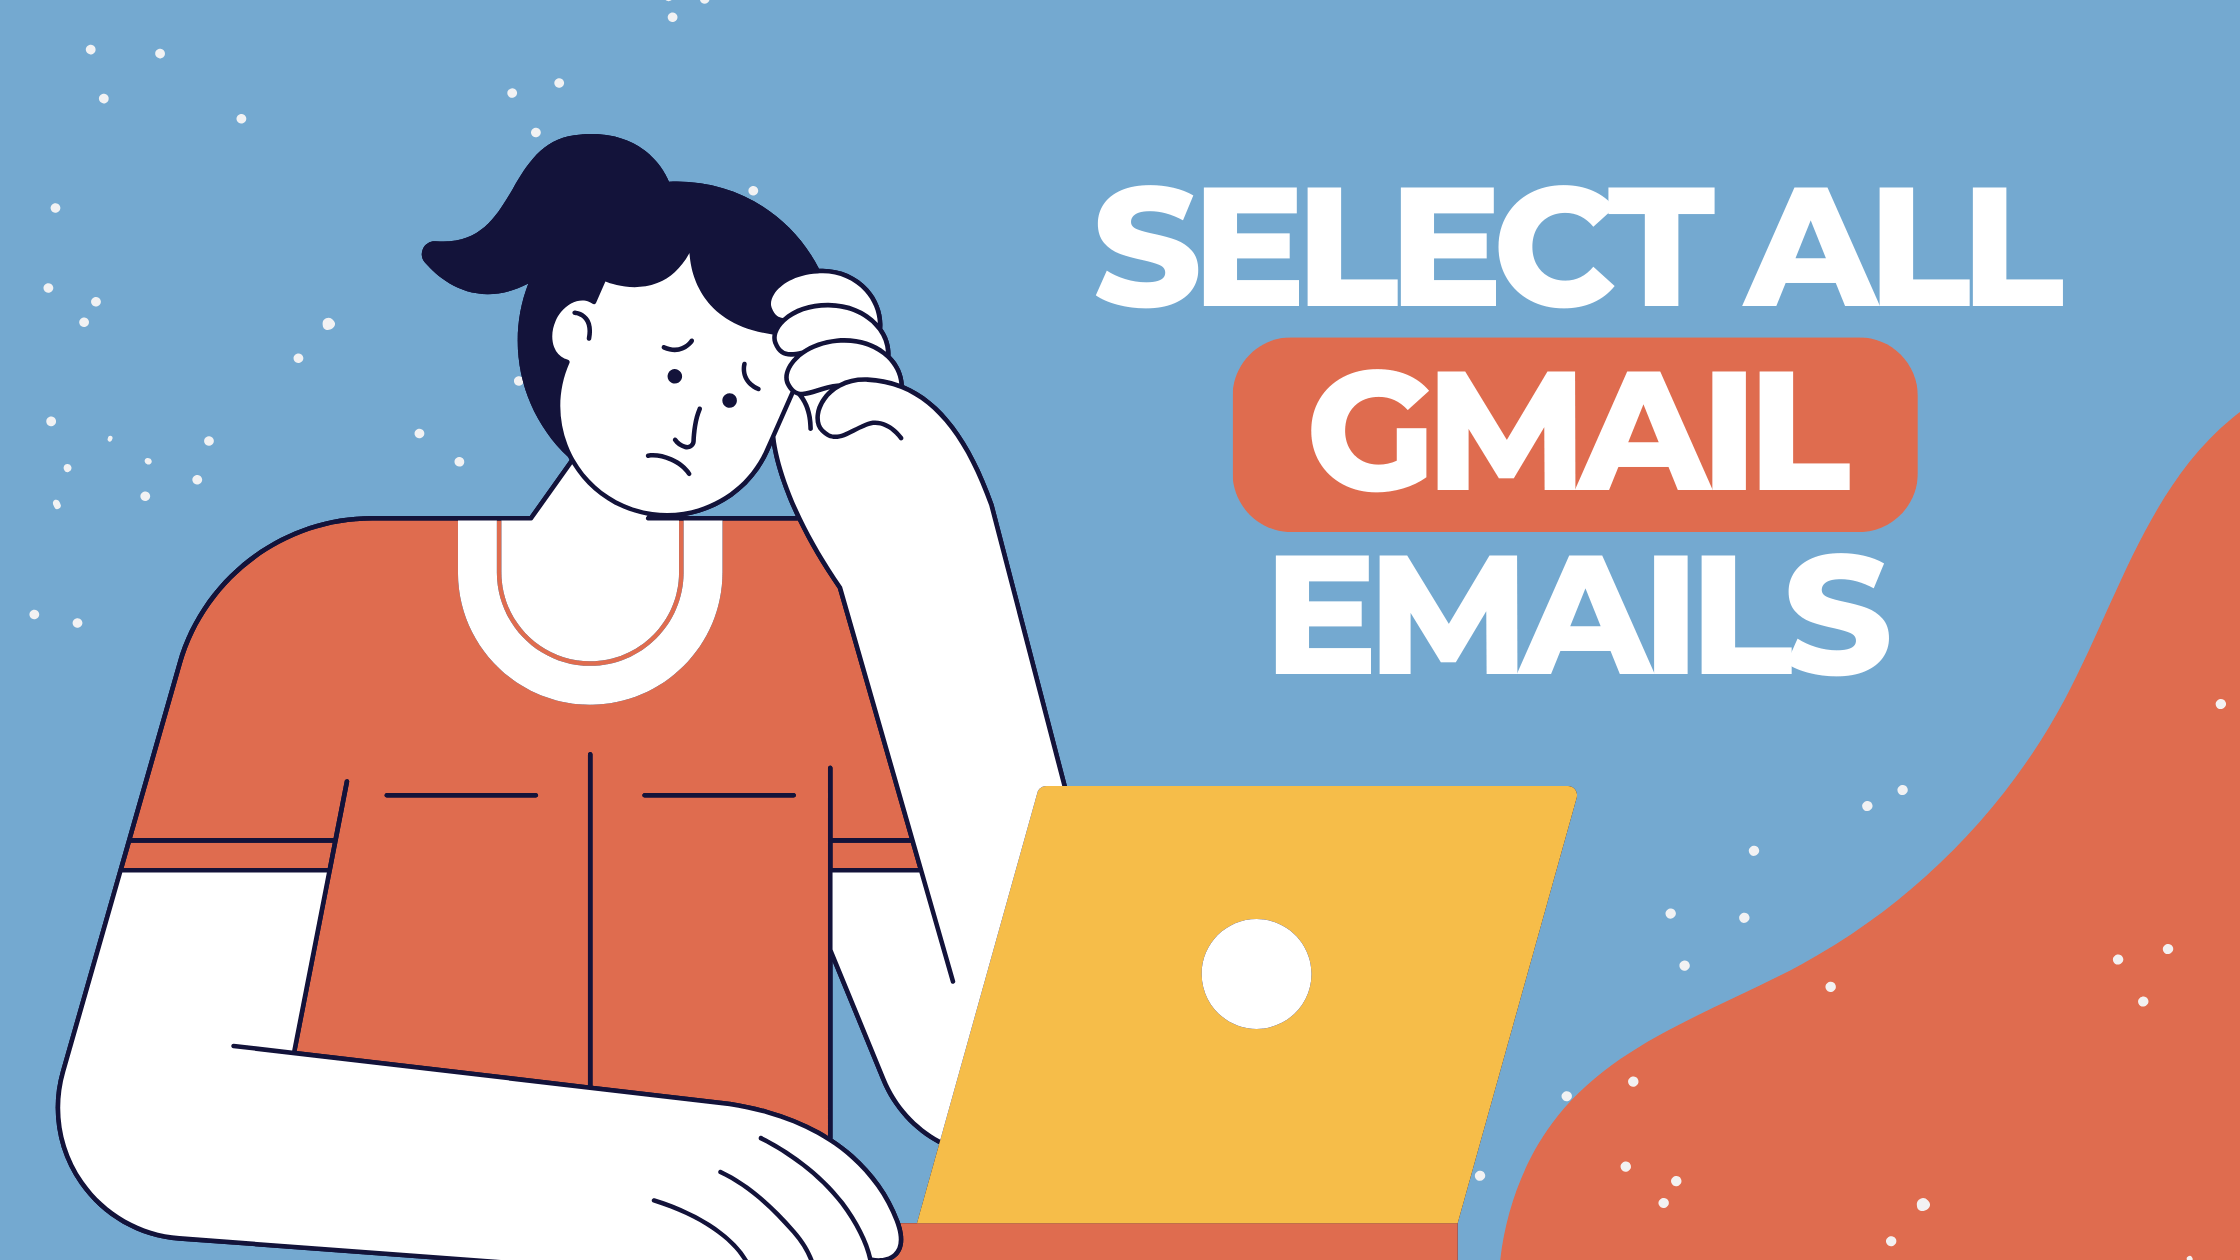 How to Select All Gmail Emails in a Flash